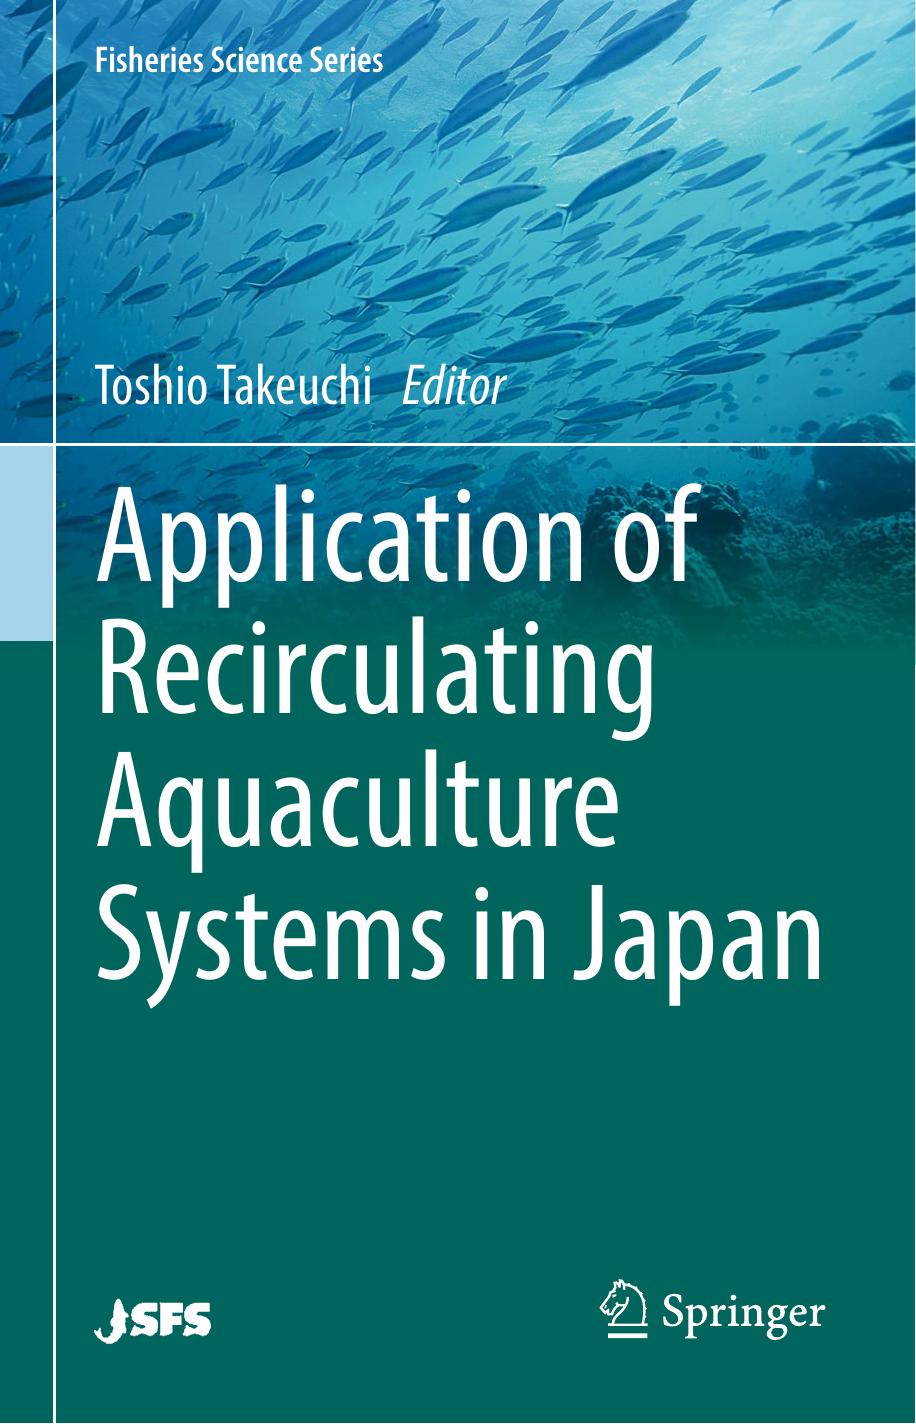 Application of Recirculating Aquaculture Systems in Japan 2017